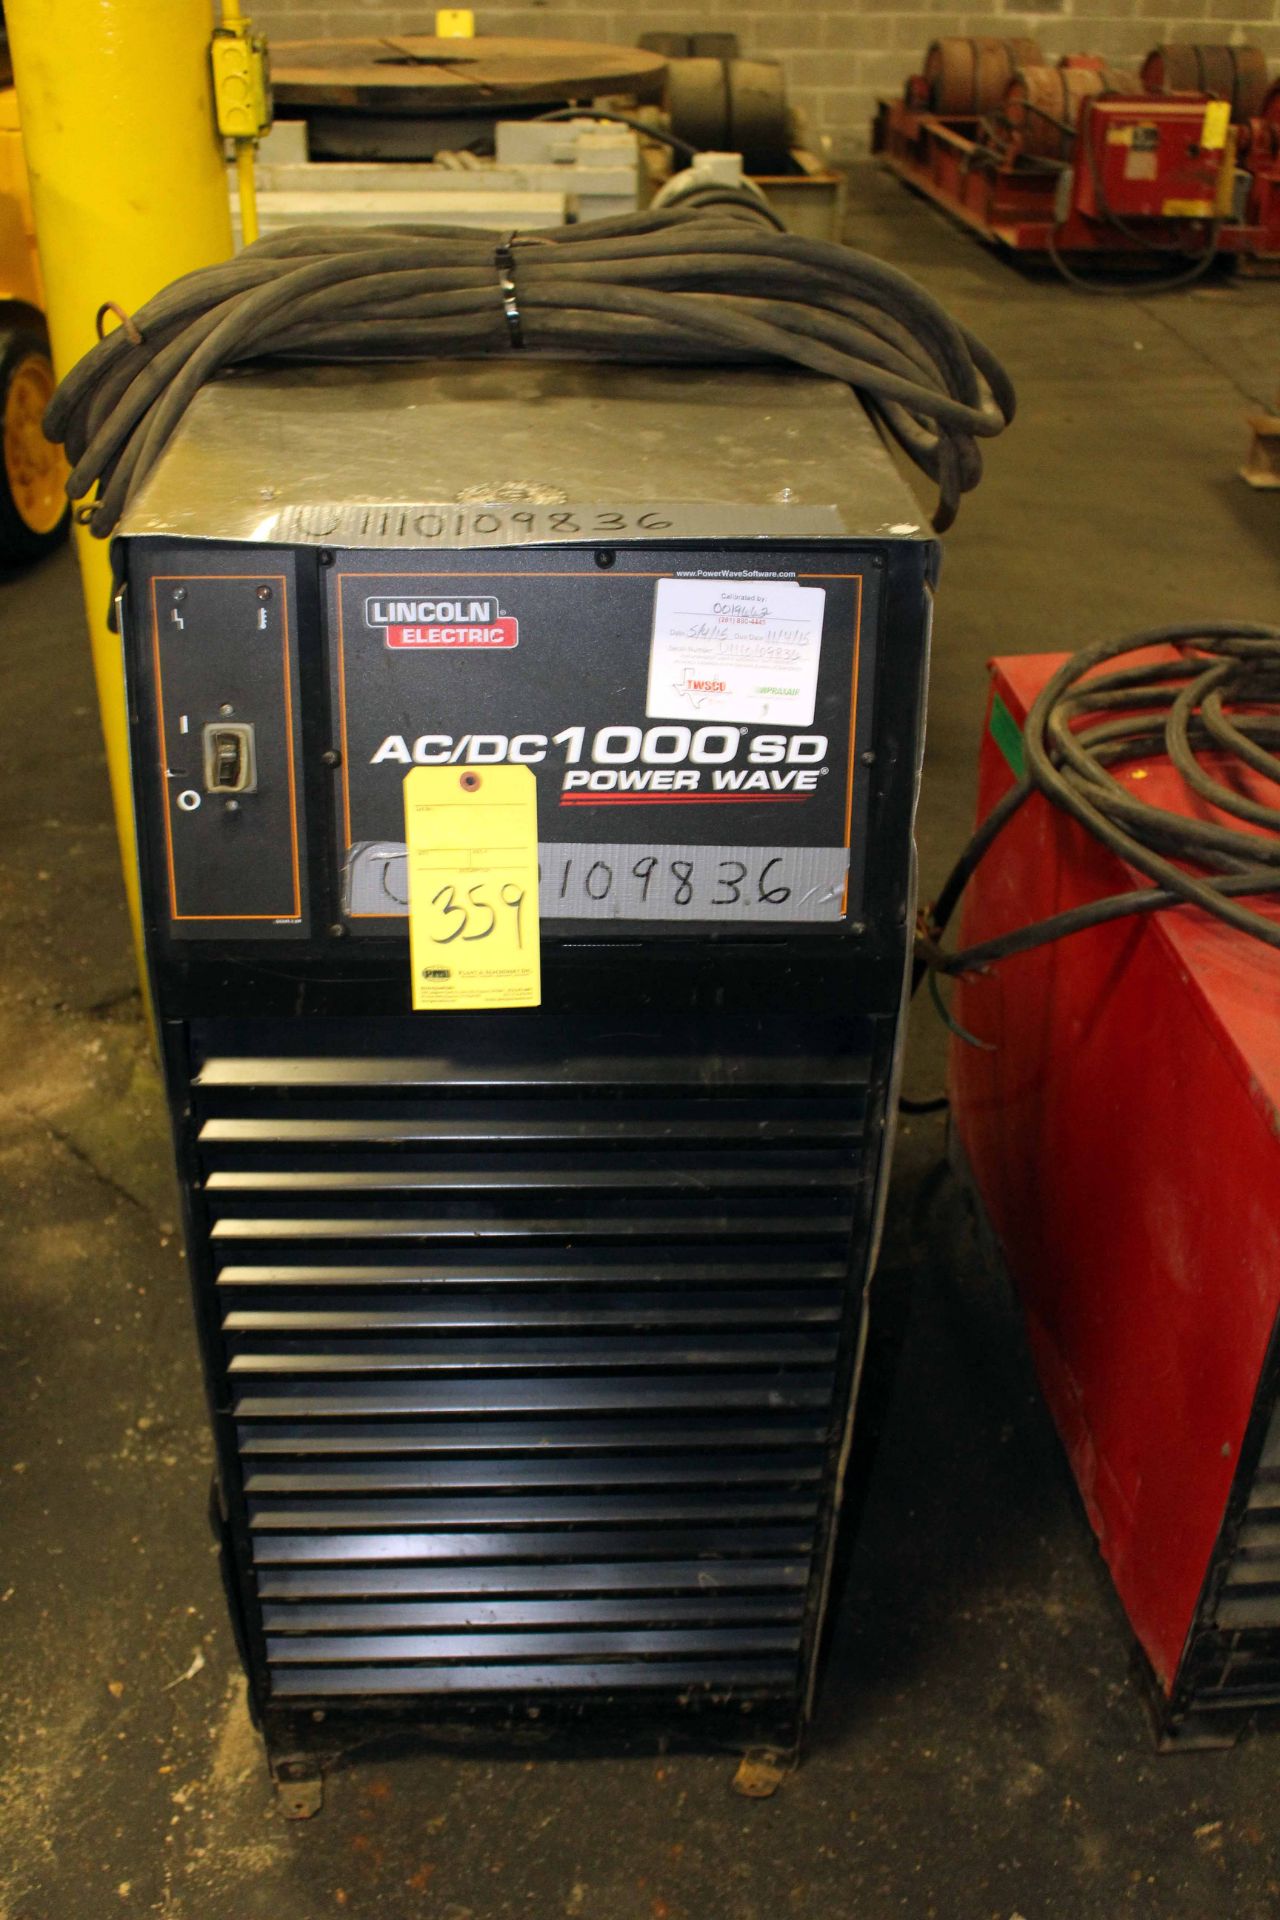 WELDING MACHINE, LINCOLN MDL. AC/DC-1000 SD, new 2011, 1000 amps., 44 v. @100% duty cycle, S/N